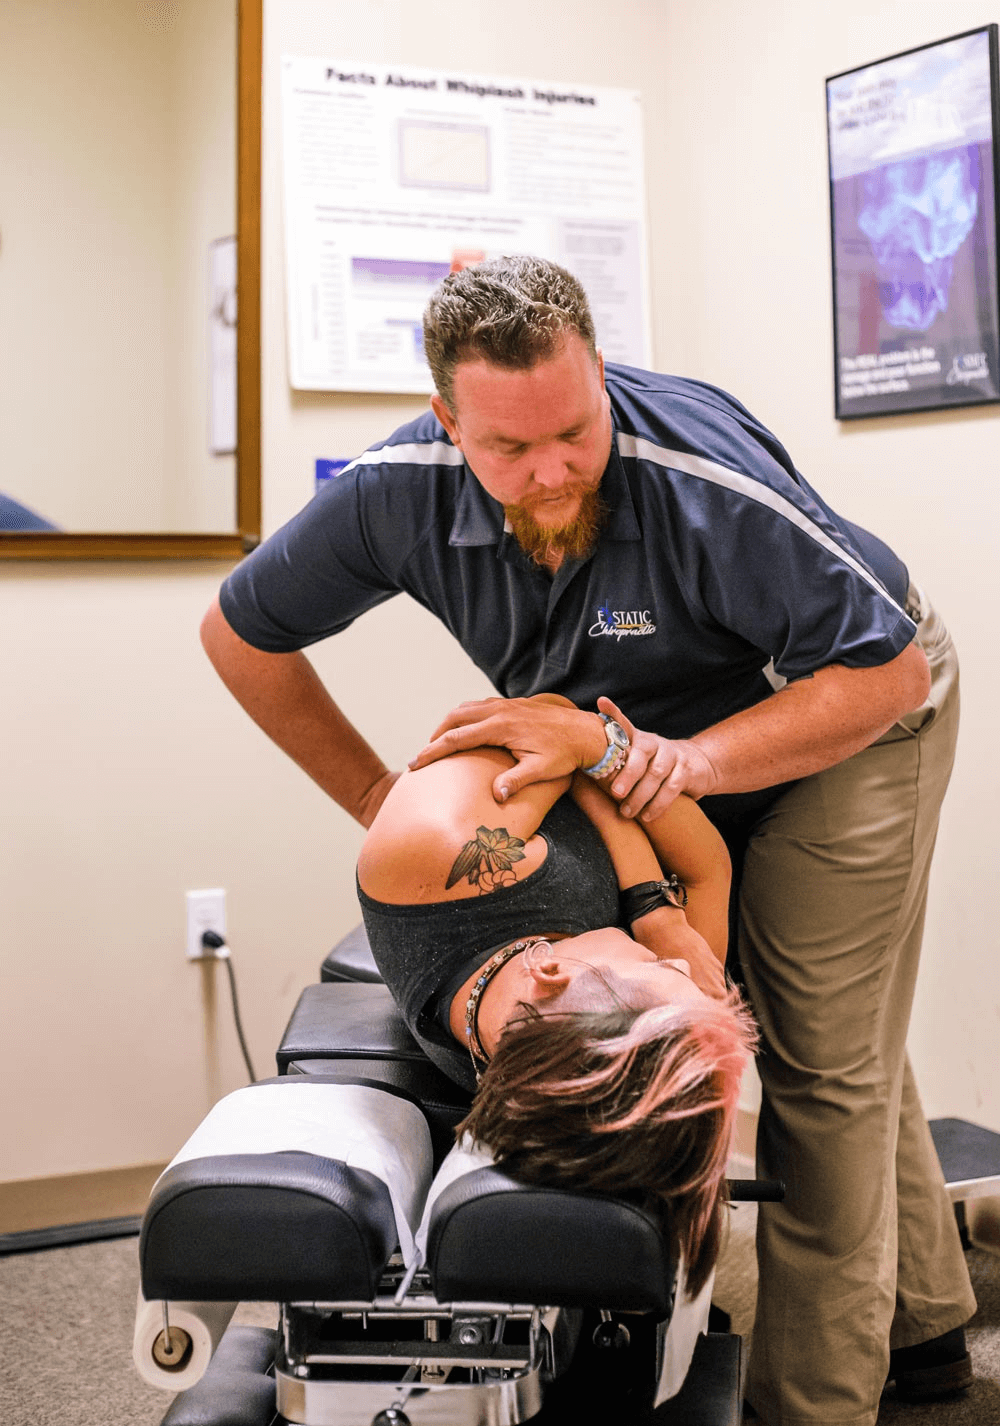 A chiropractor adjusts a patient lying on their side on an adjustment table. The patient, who is seeking relief from back pain following a car accident, has a tattoo on their upper arm and is wearing a sleeveless top. Chiropractic posters are visible on the wall.